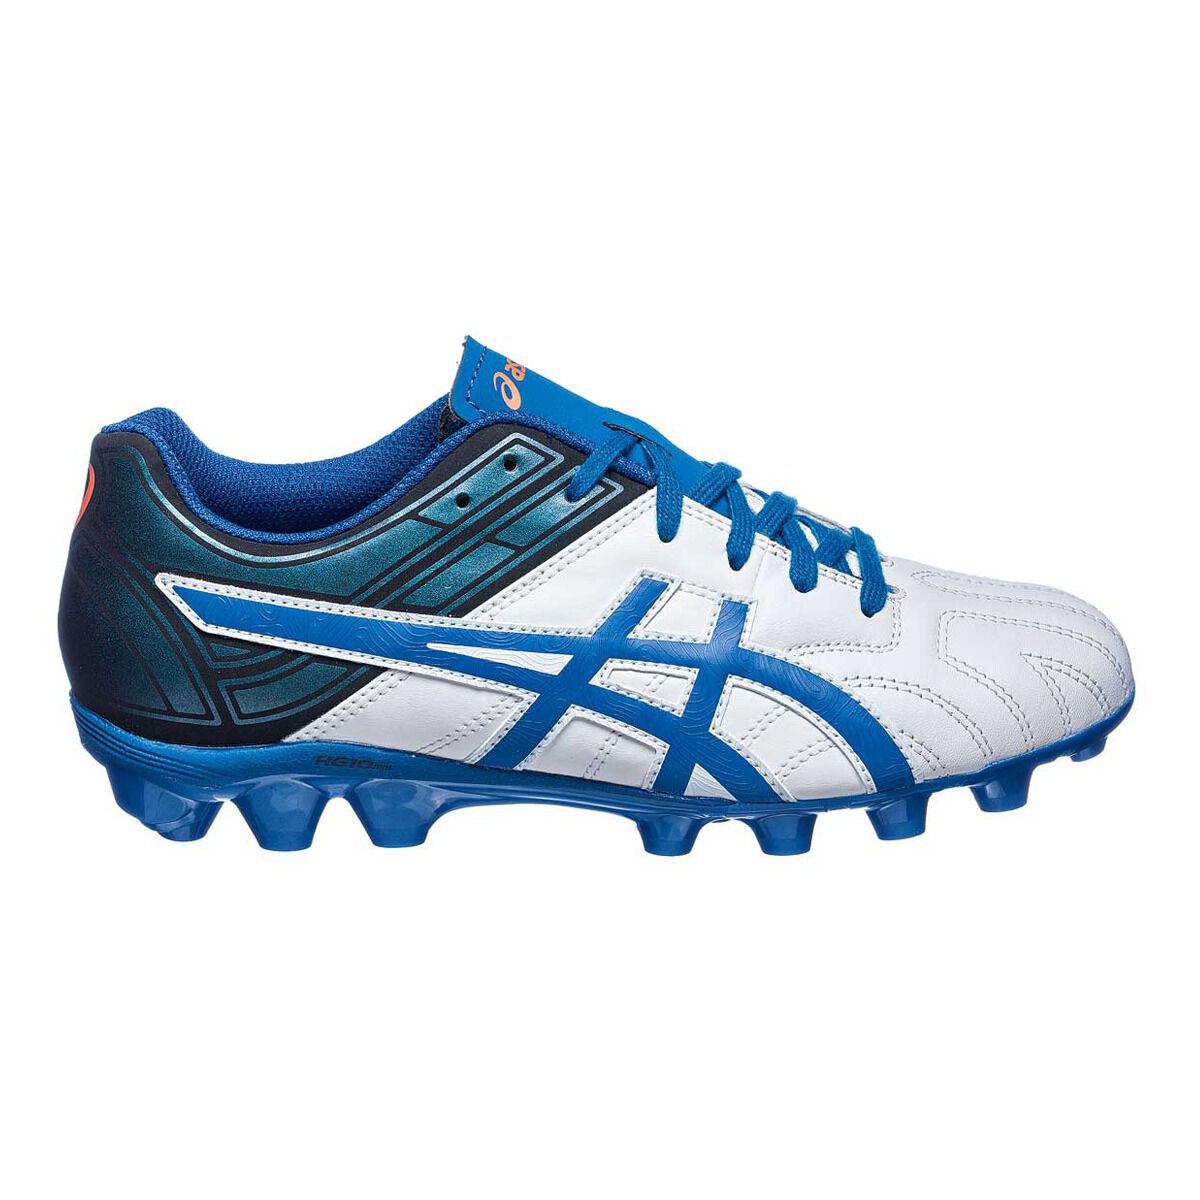 asics junior rugby boots